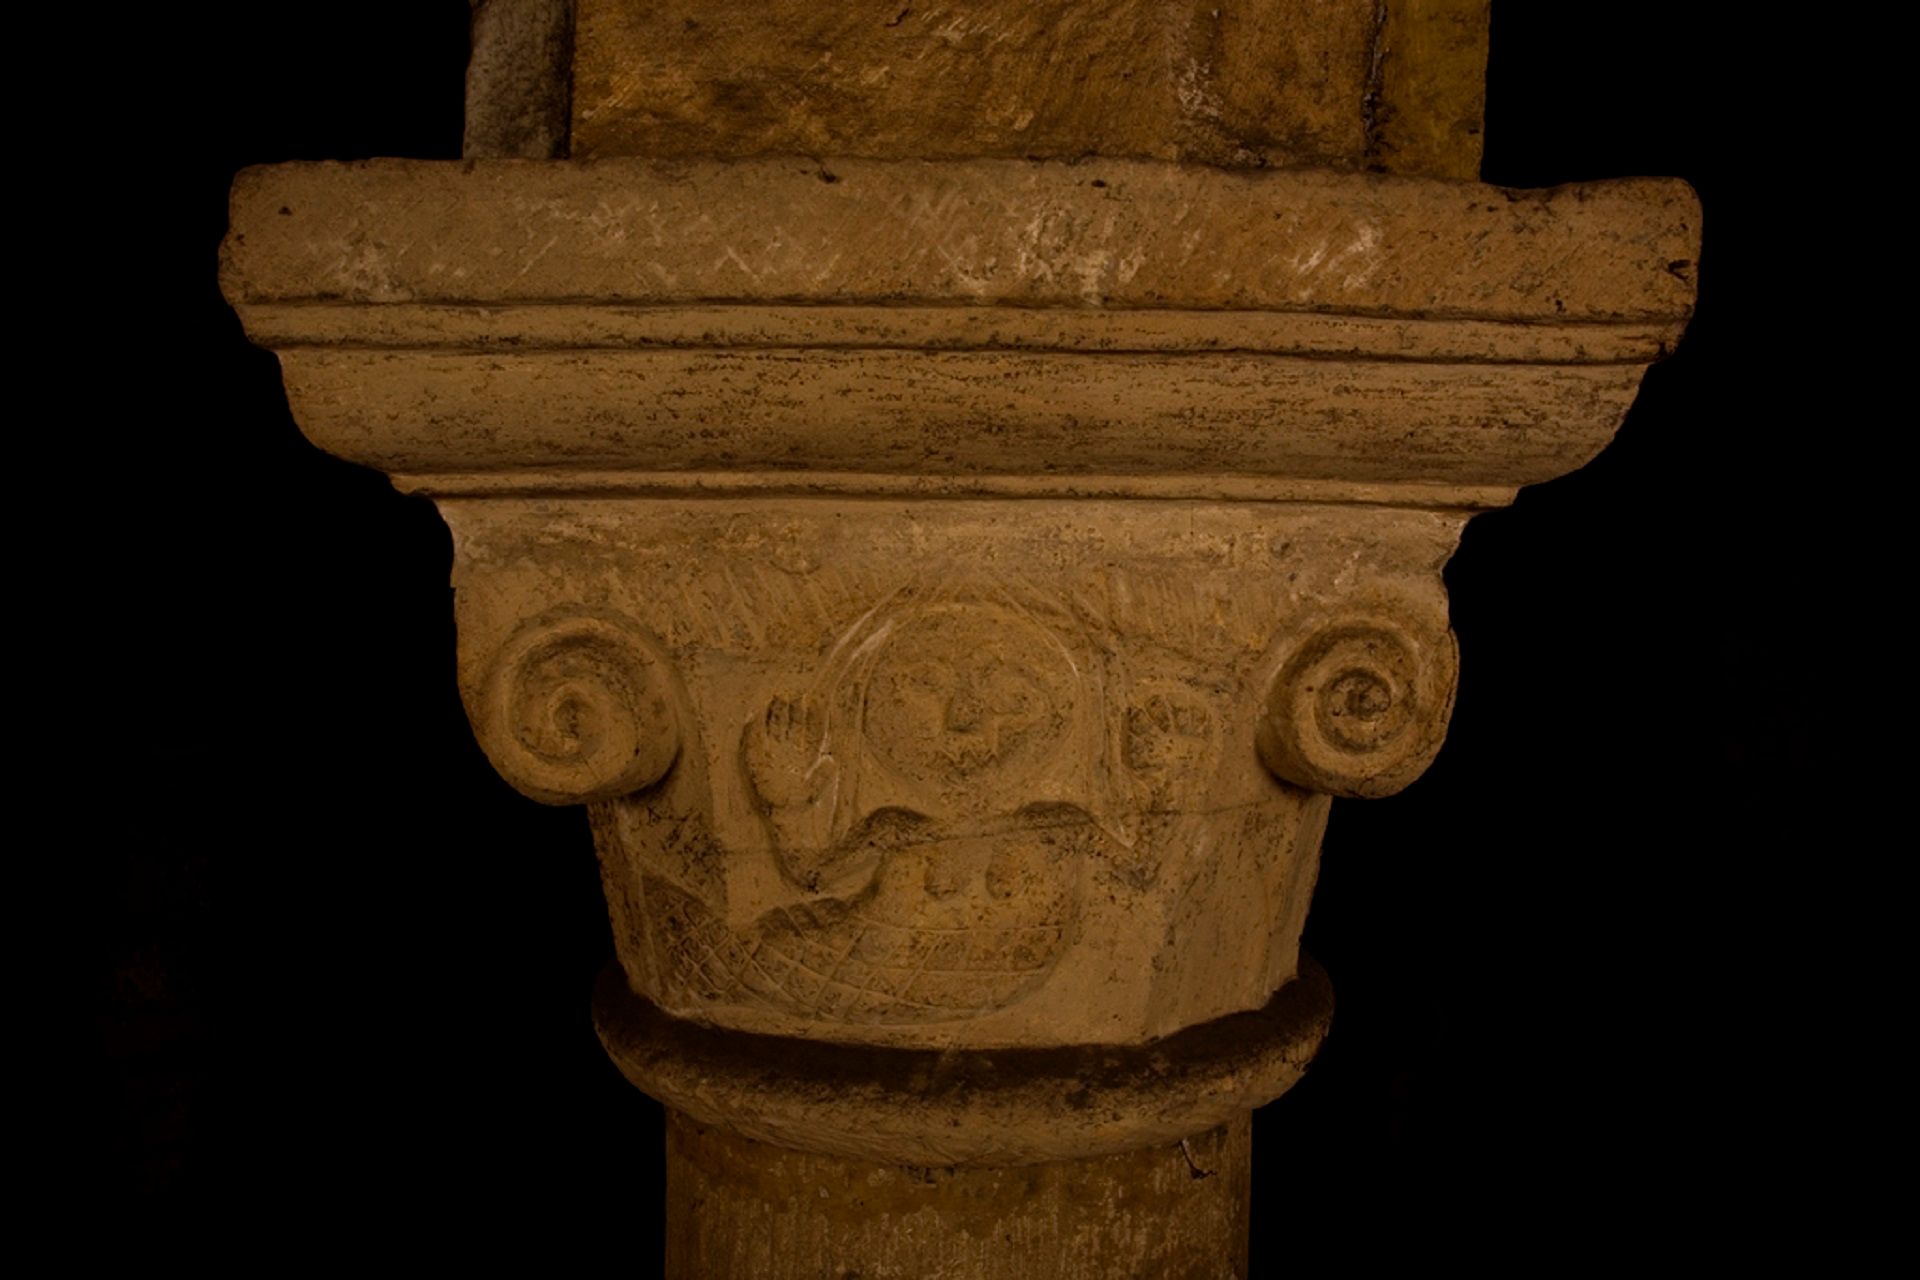 Photograph of the mermaid carving at the top of pillar in the Norman Chapel. She is depicted with raised hands.